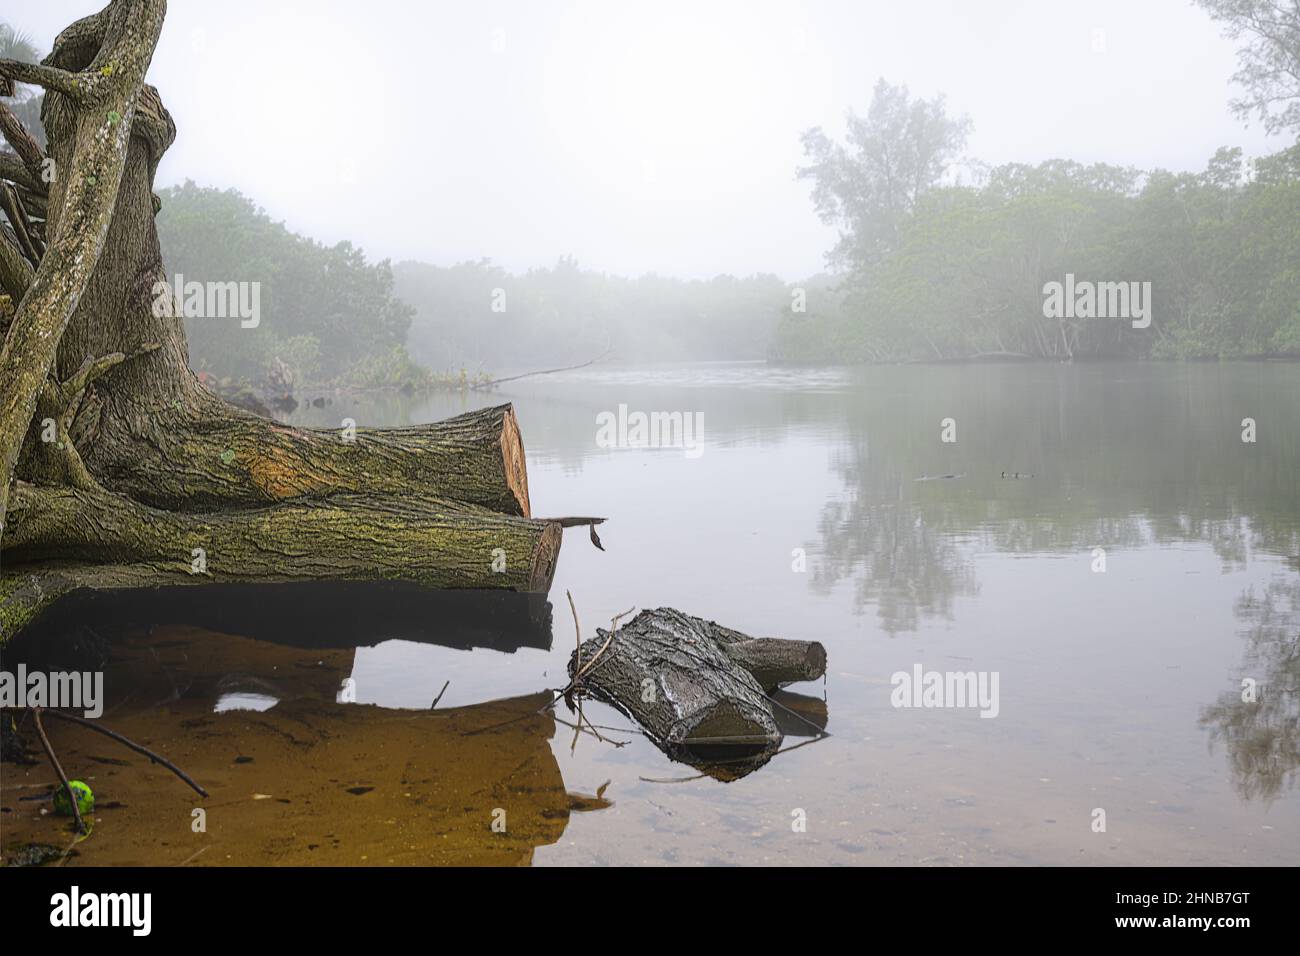 A cloud of mist floats over the El Rio canal in Boca Raton at dawn Stock Photo